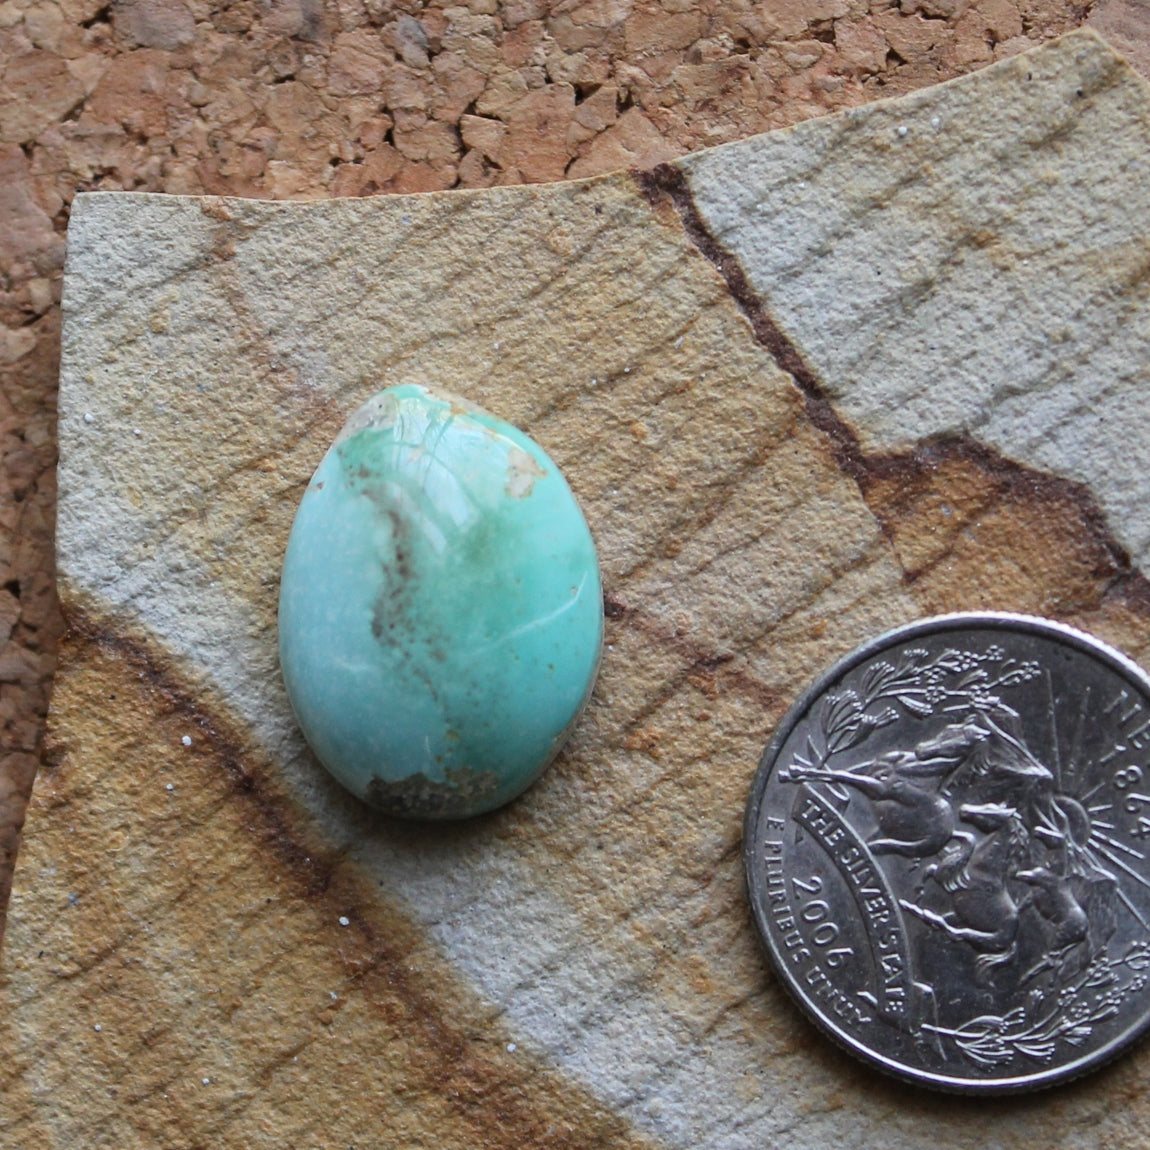 18.7 carat light blue Stone Mountain Turquoise cabochon with a high dome